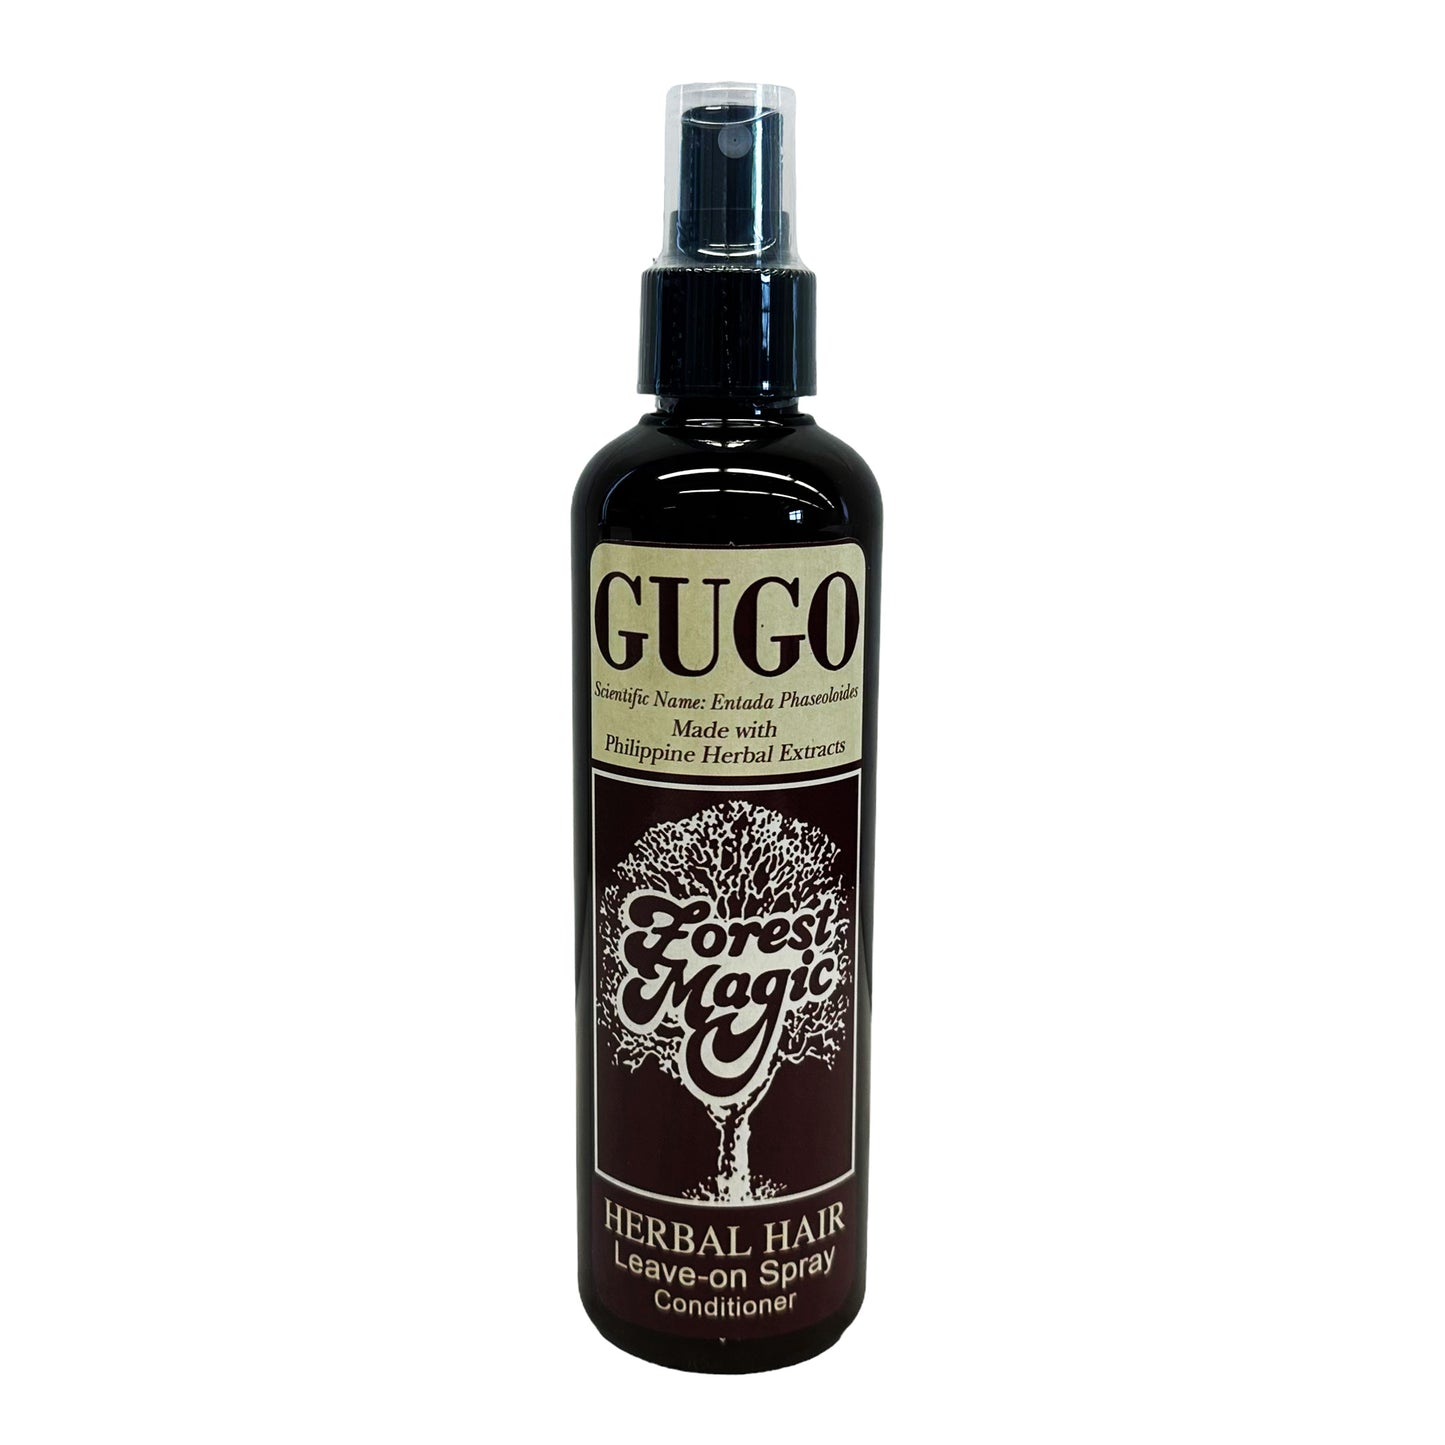 Front graphic image of Forest Magic Gugo Herbal Hair Leave-on Spray 8.45oz (250ml)